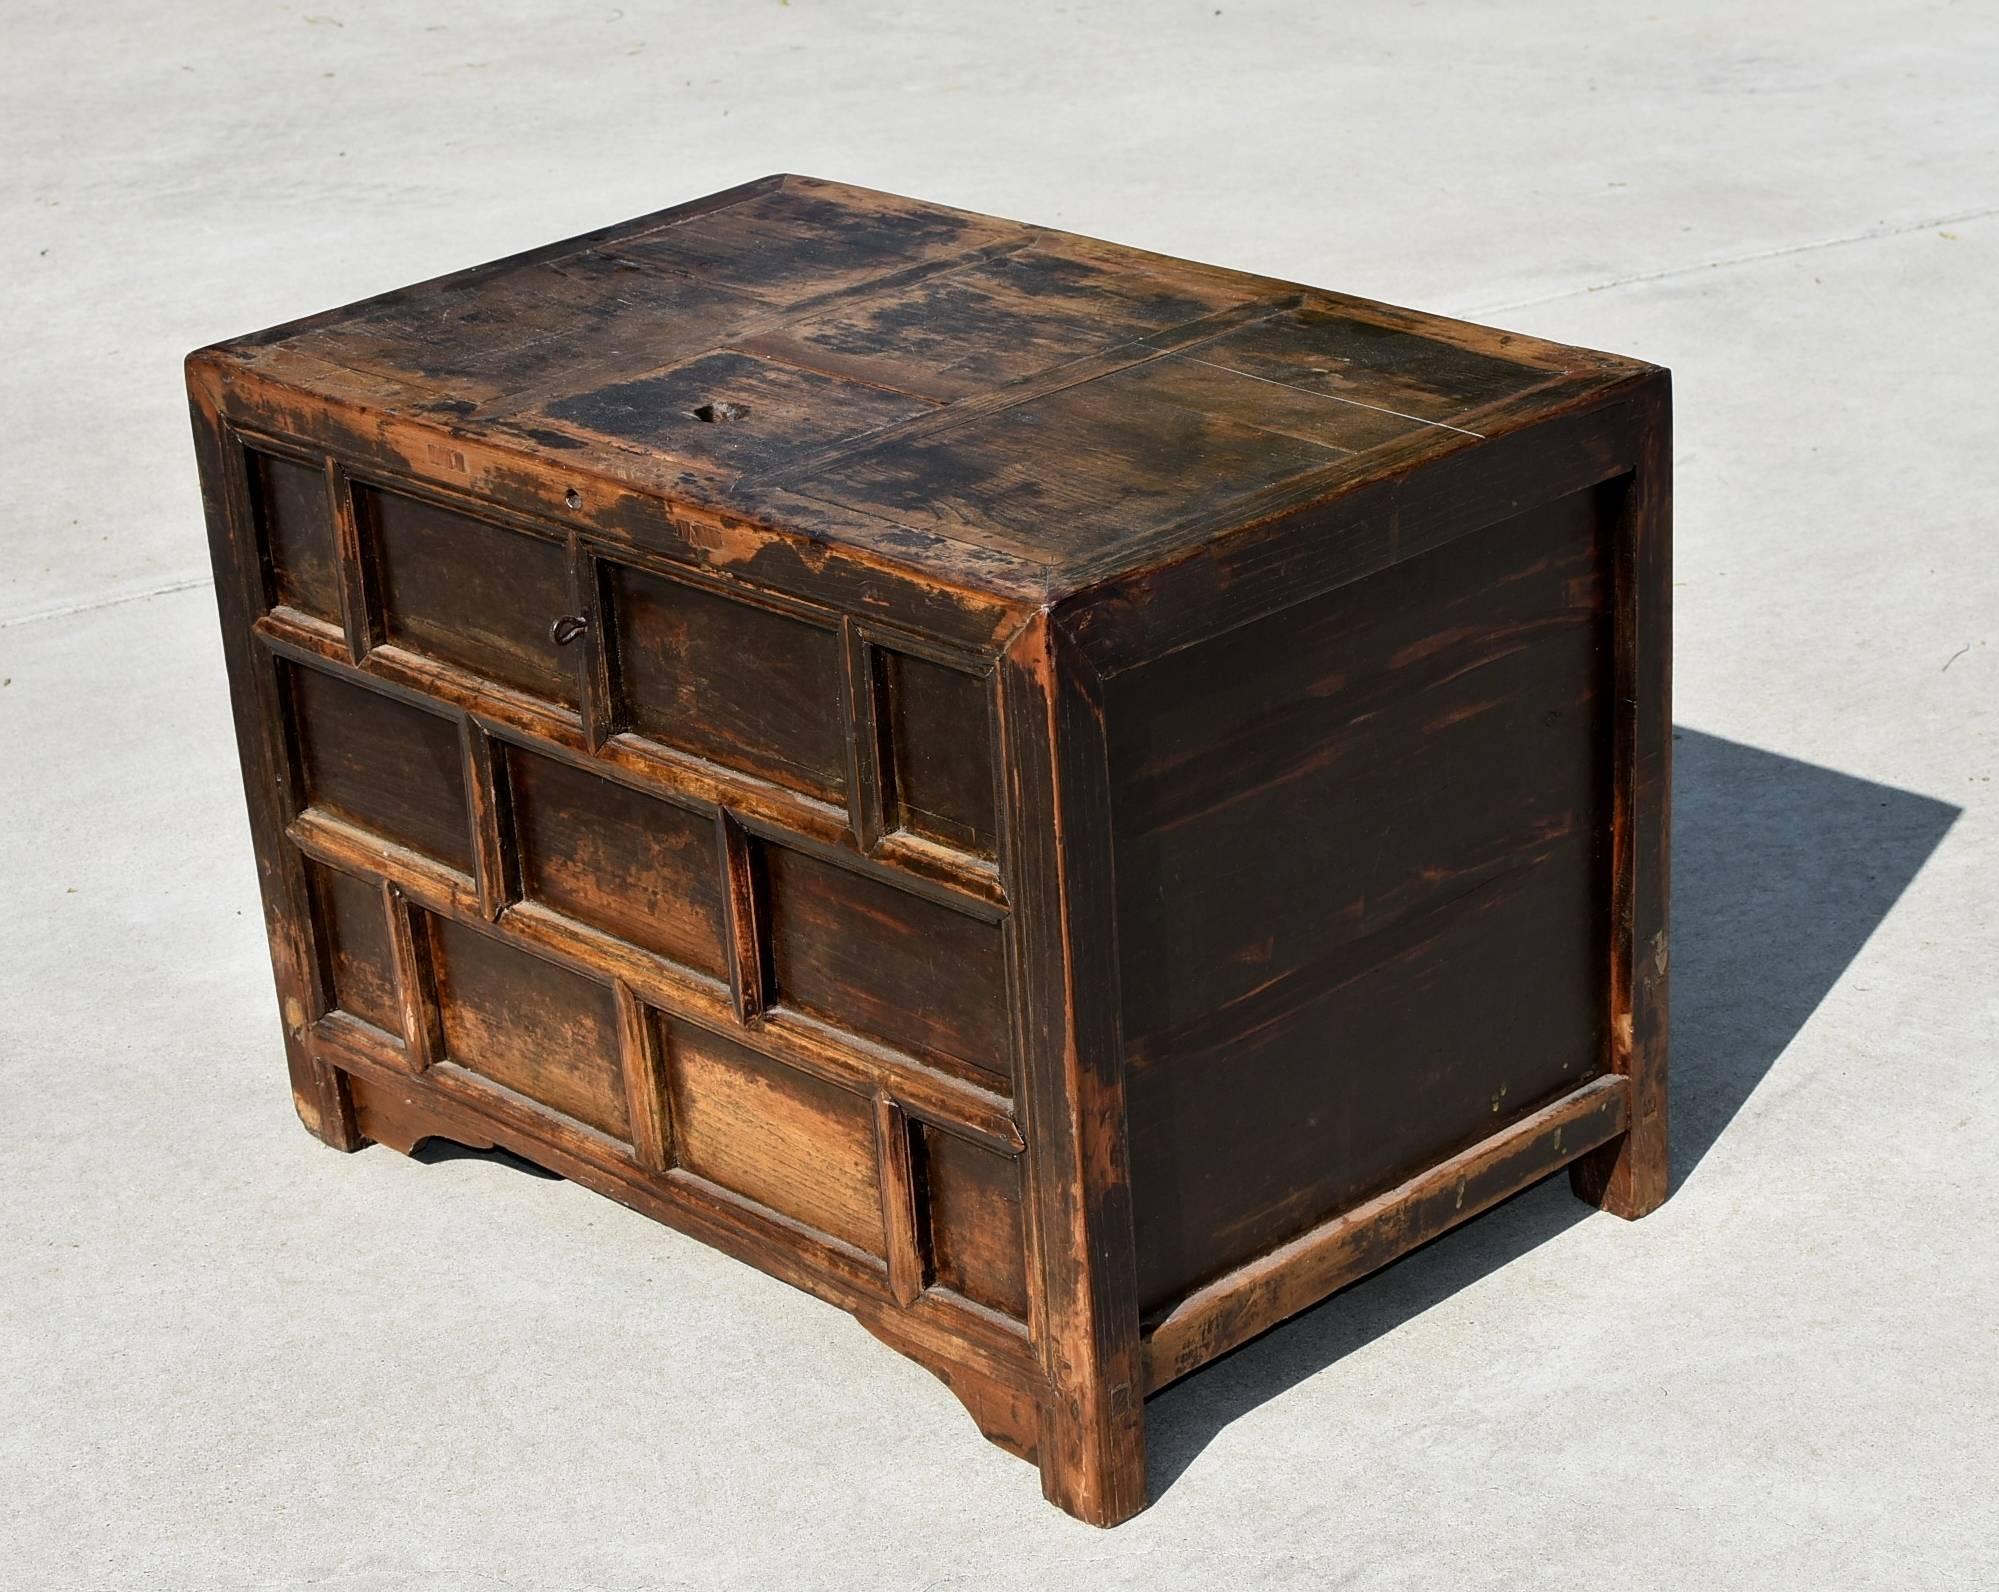 Chinese Antique Security Chest, Money Trunk